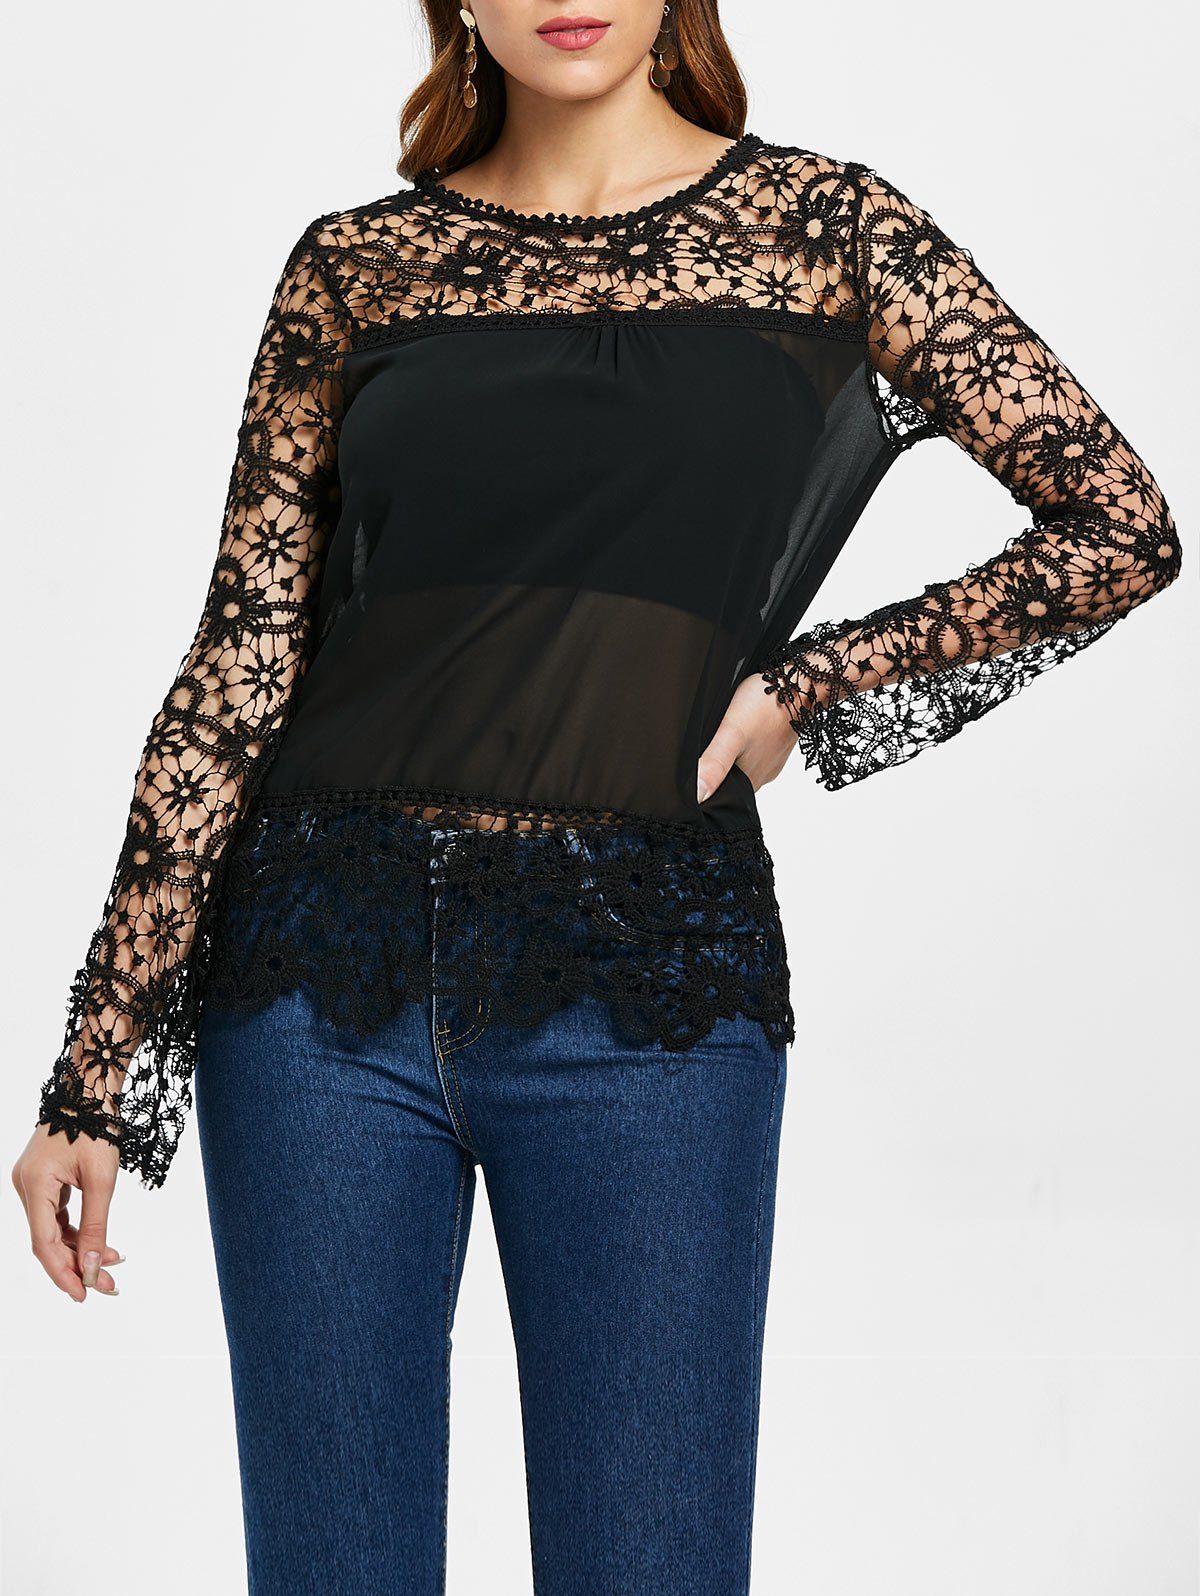 Sale Stylish Round Neck Long Sleeve Spliced Hollow Out Women's Blouse  